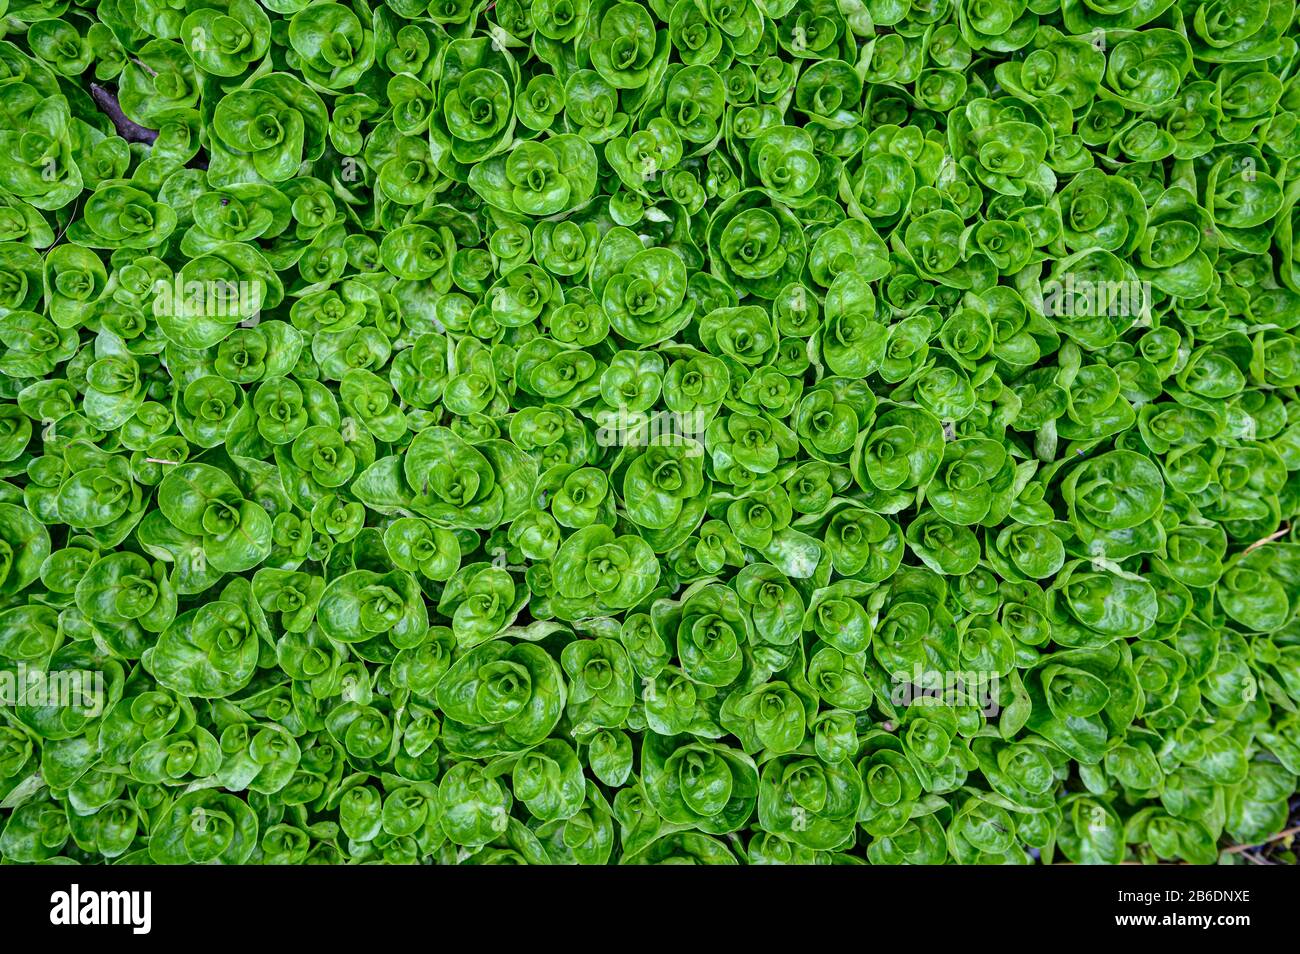 Abstract water plant green leaves background Stock Photo